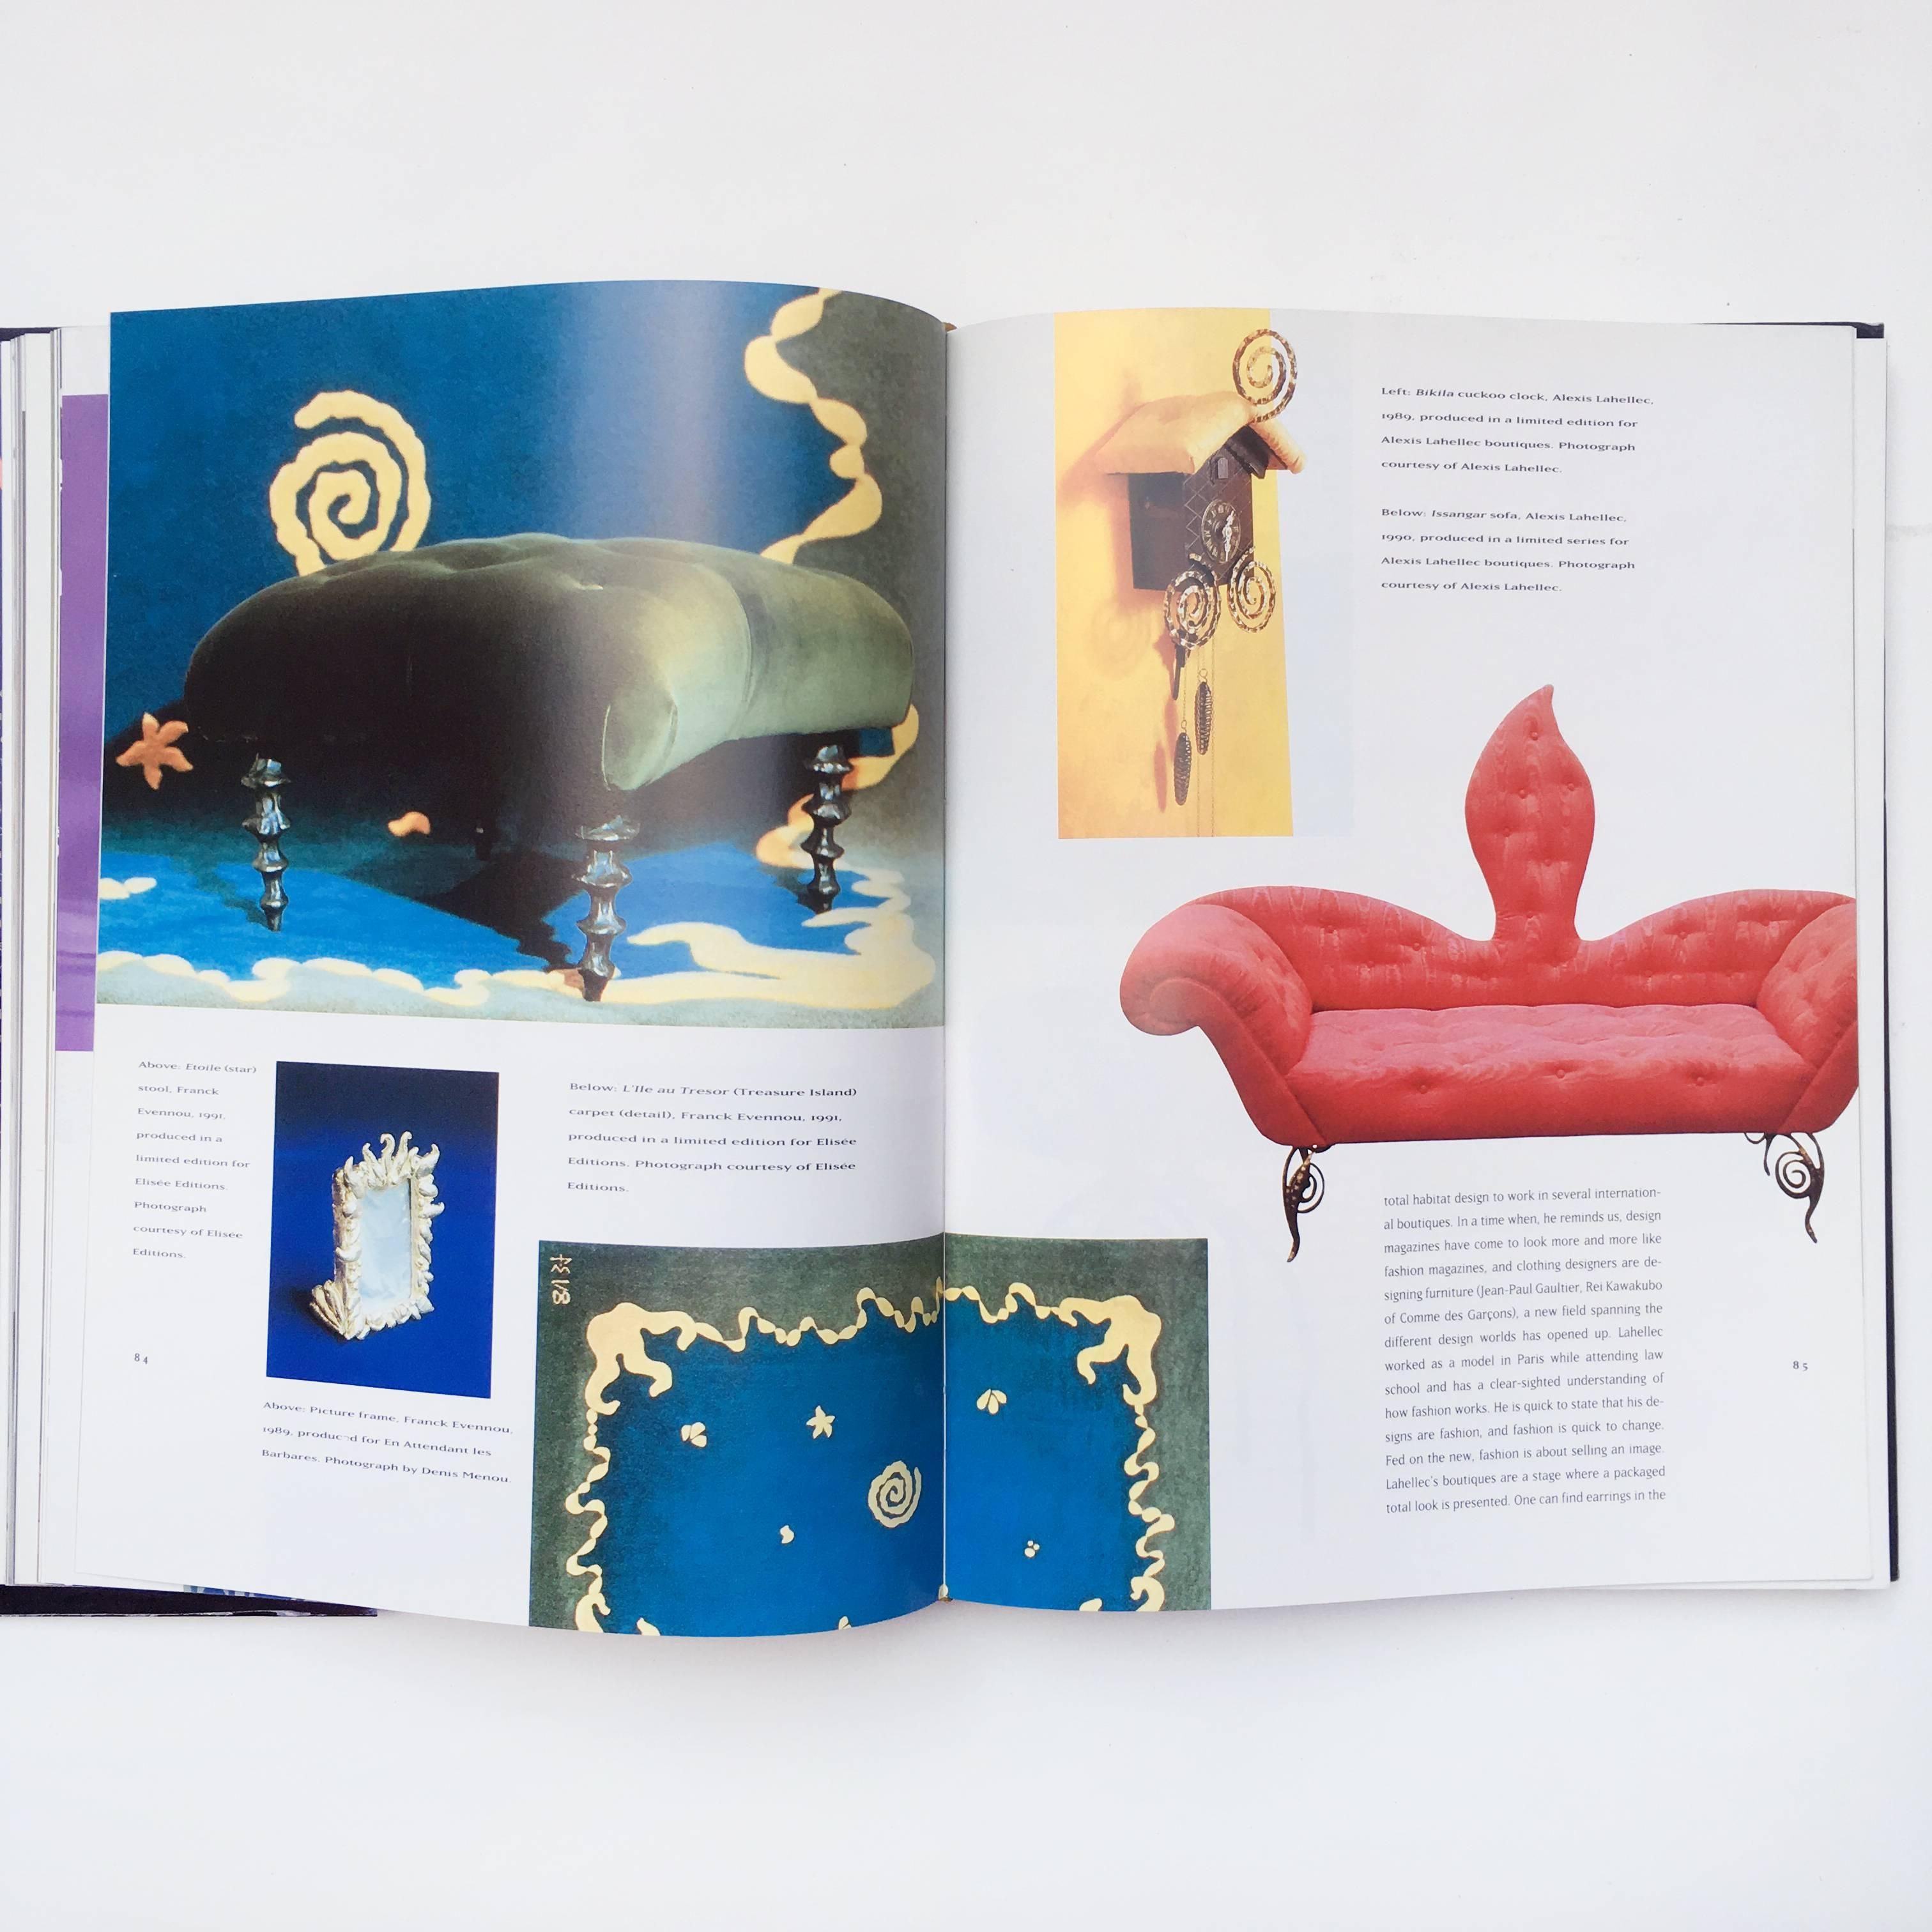 Neo Furniture, Claire Downey, Published by Rizzoli New York, 1992, 1st Edition 

Creative interpretations of sofas, tables, chairs, lighting and decorative objects are categorized under the headings Primitivism, the New Baroque, the New